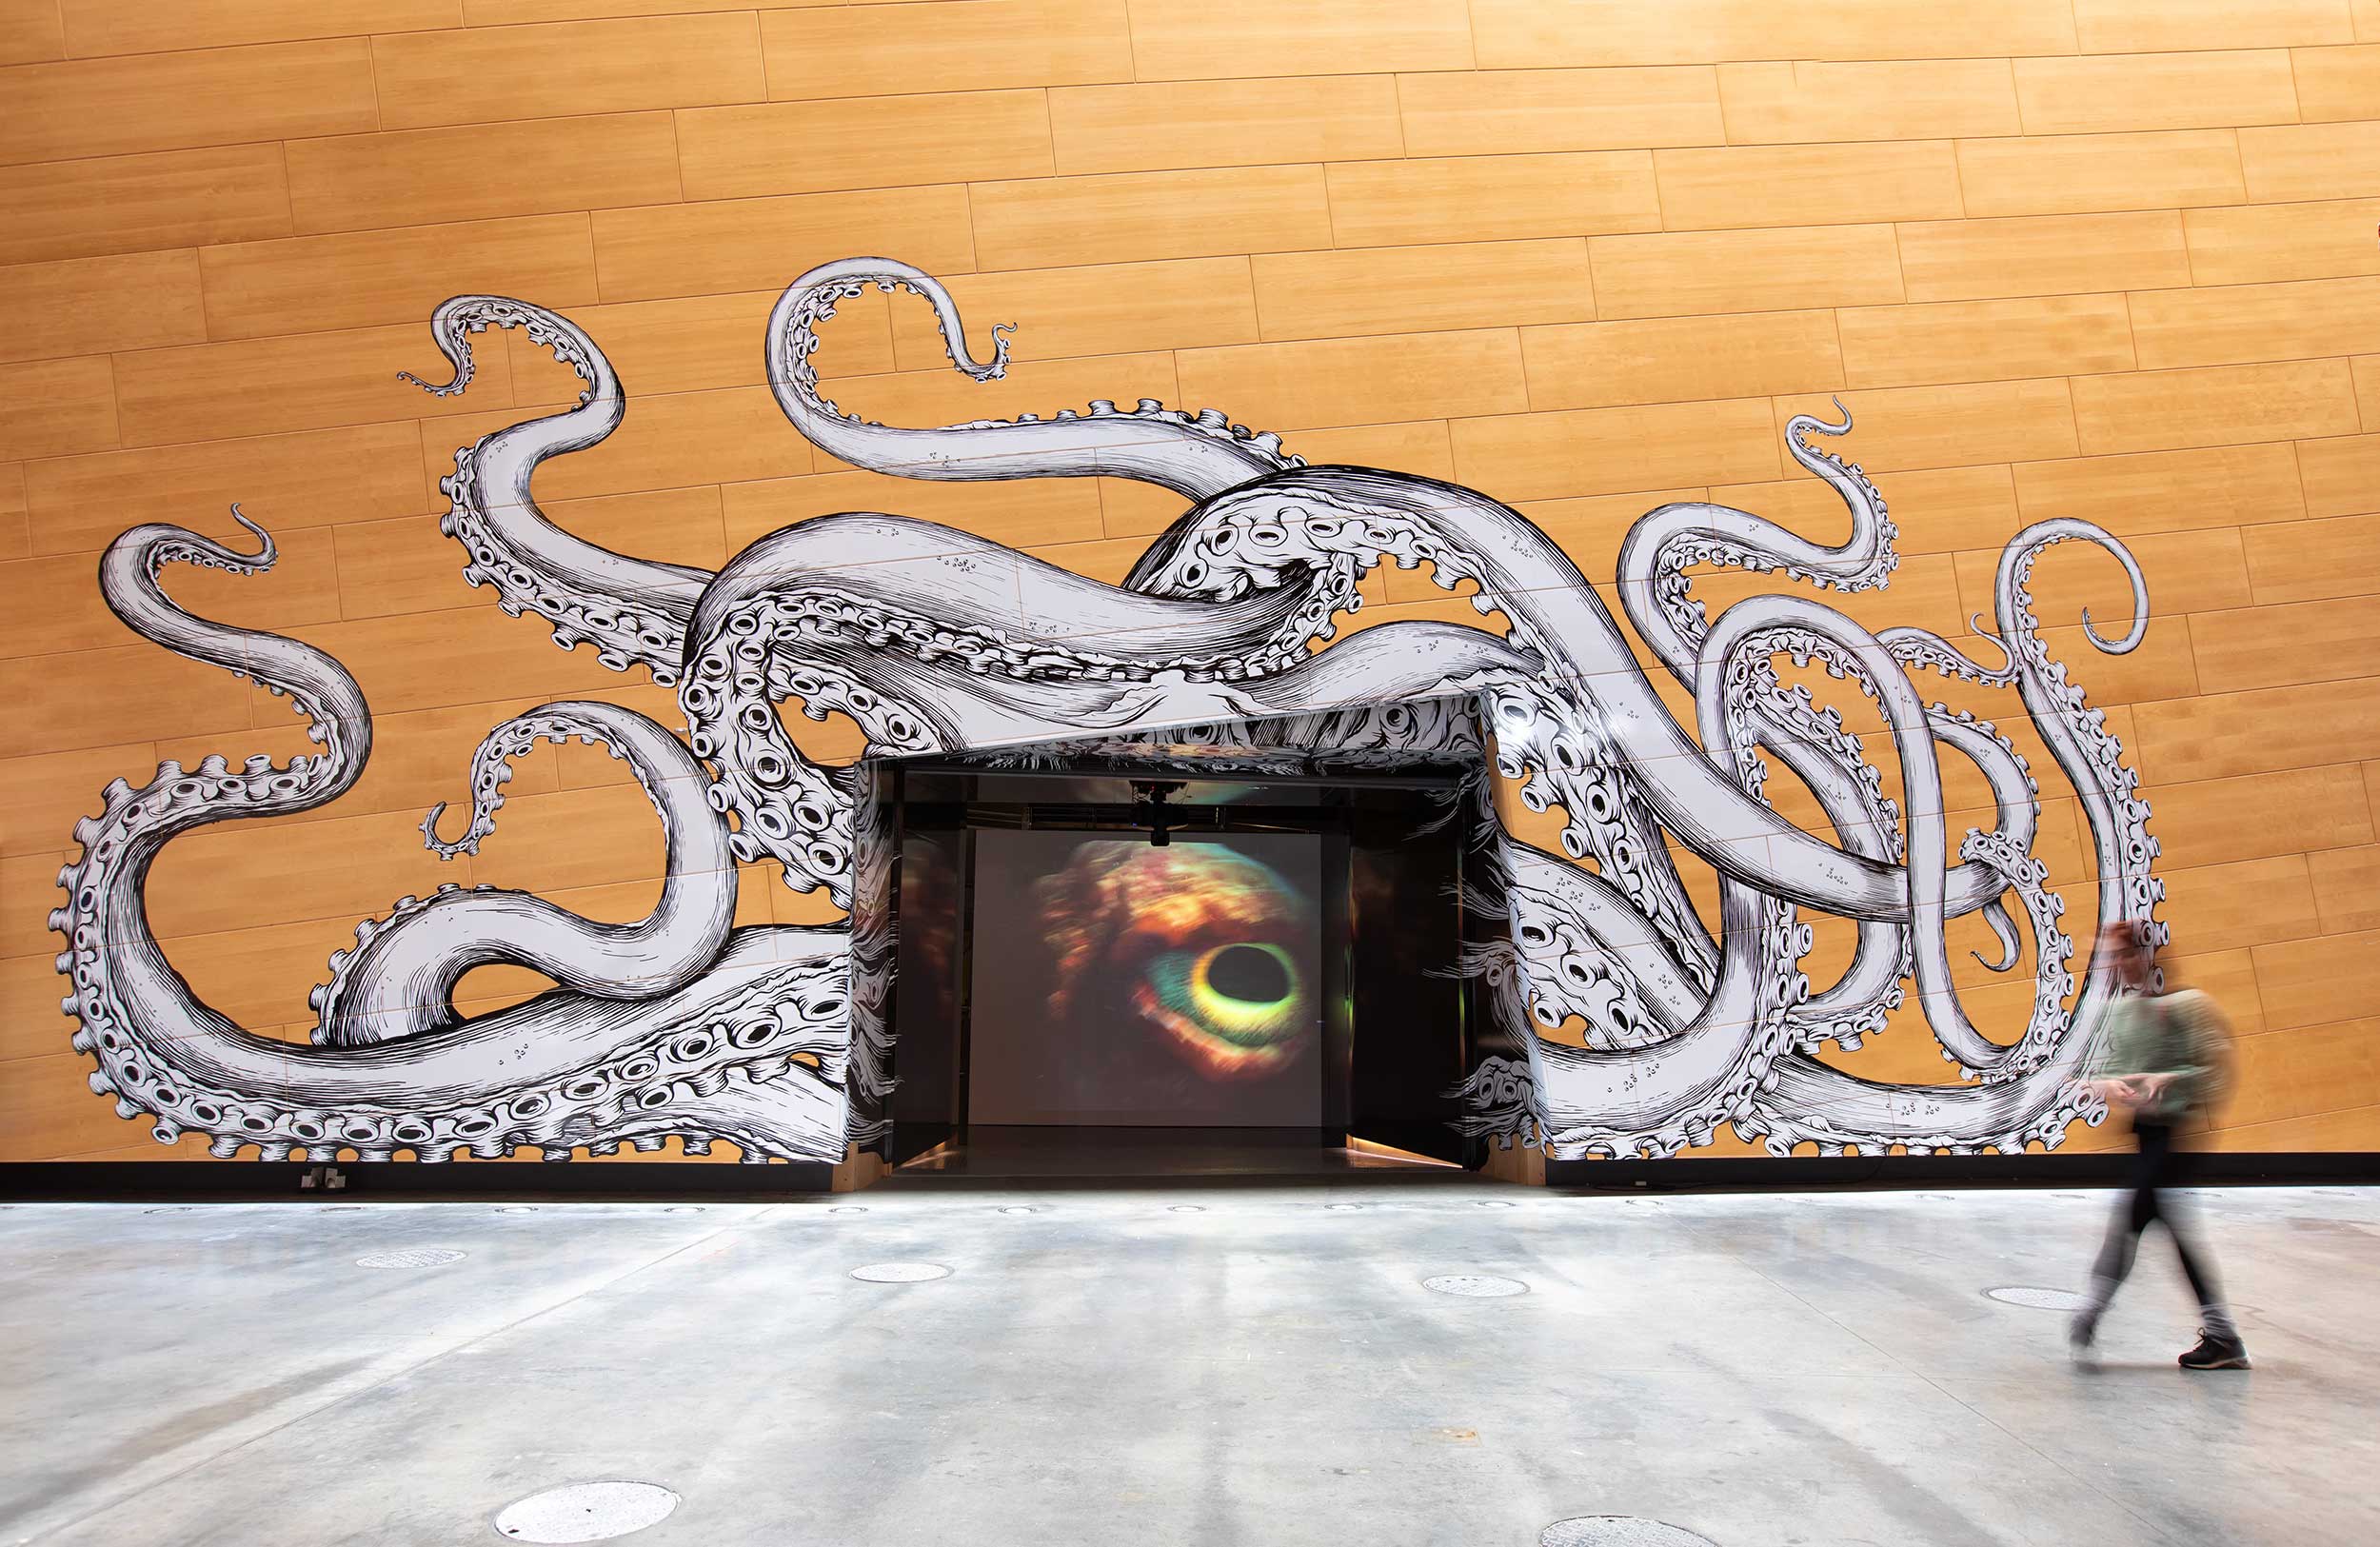 A photo of the entrance to the Museum's 'Monsters of the Deep' exhibition. Large tentacles are painted onto the wall surrounding the entrance, while a kraken eye peers at the viewer from inside.